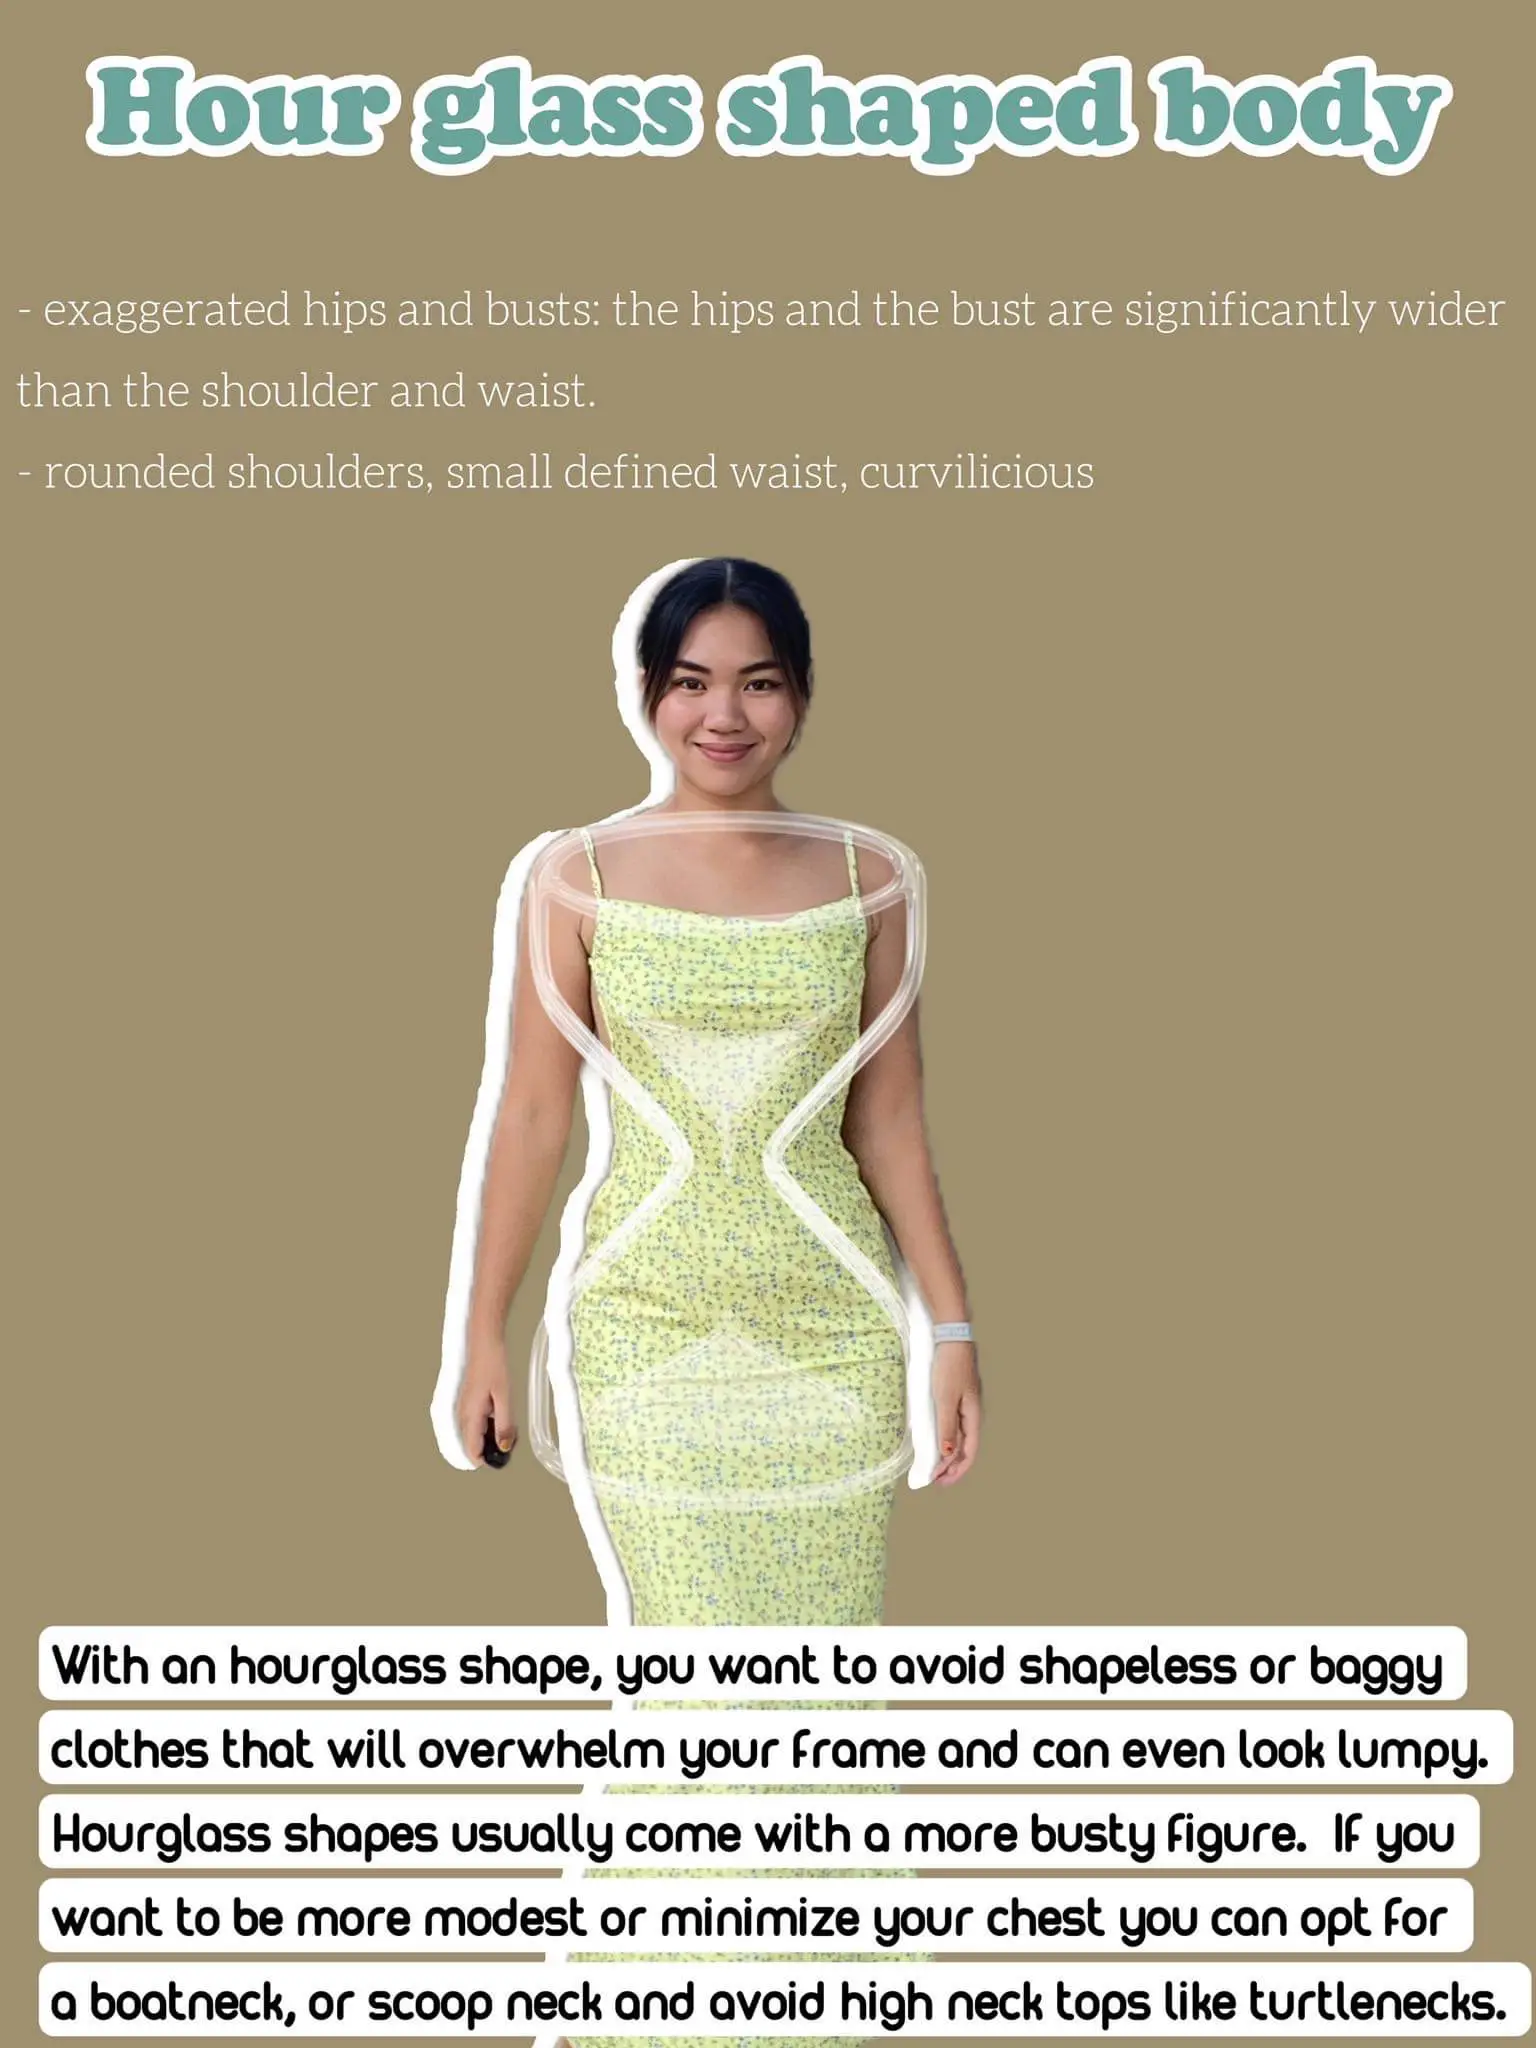 Outfits For Hourglass Body Shape : Maximize Your Style And Dress